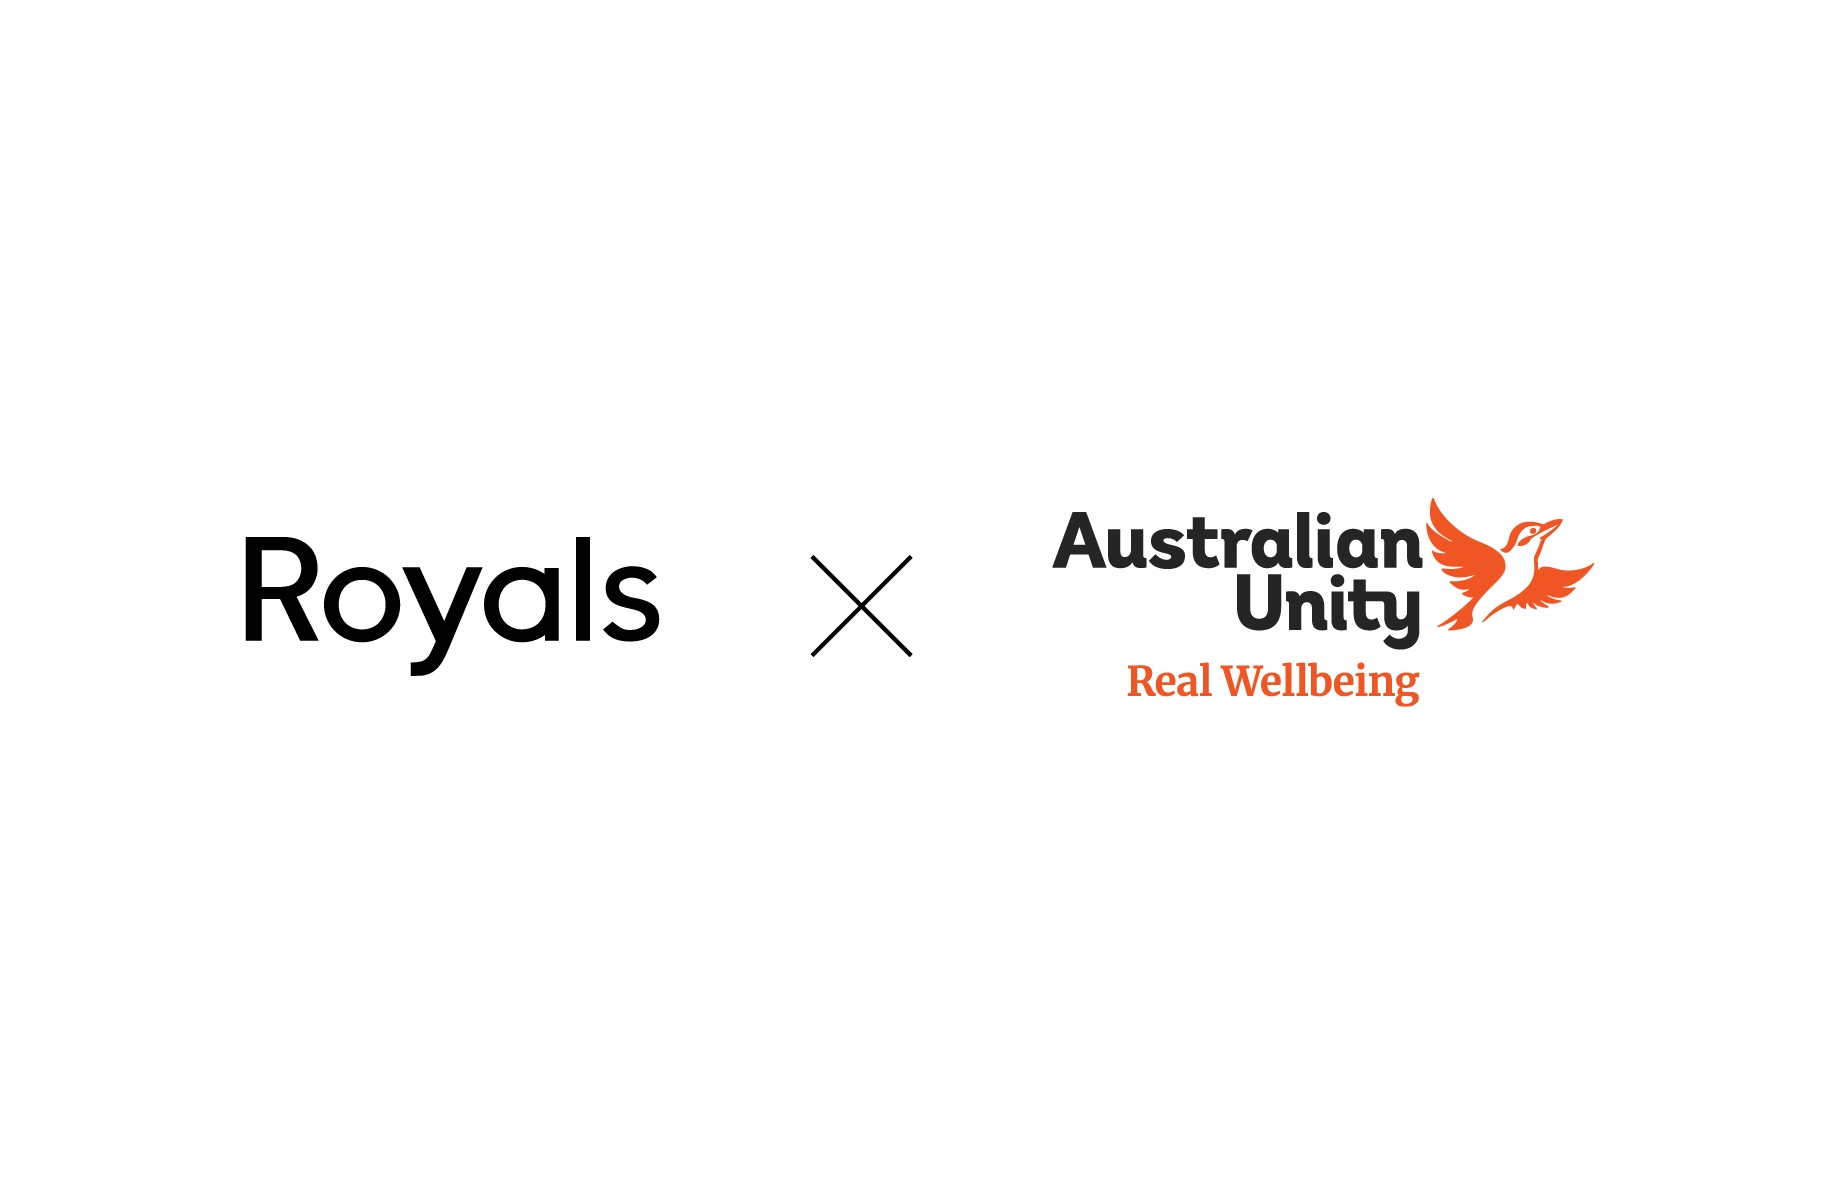 Australian Unity appoints The Royals to bring Real Wellbeing to all Australians